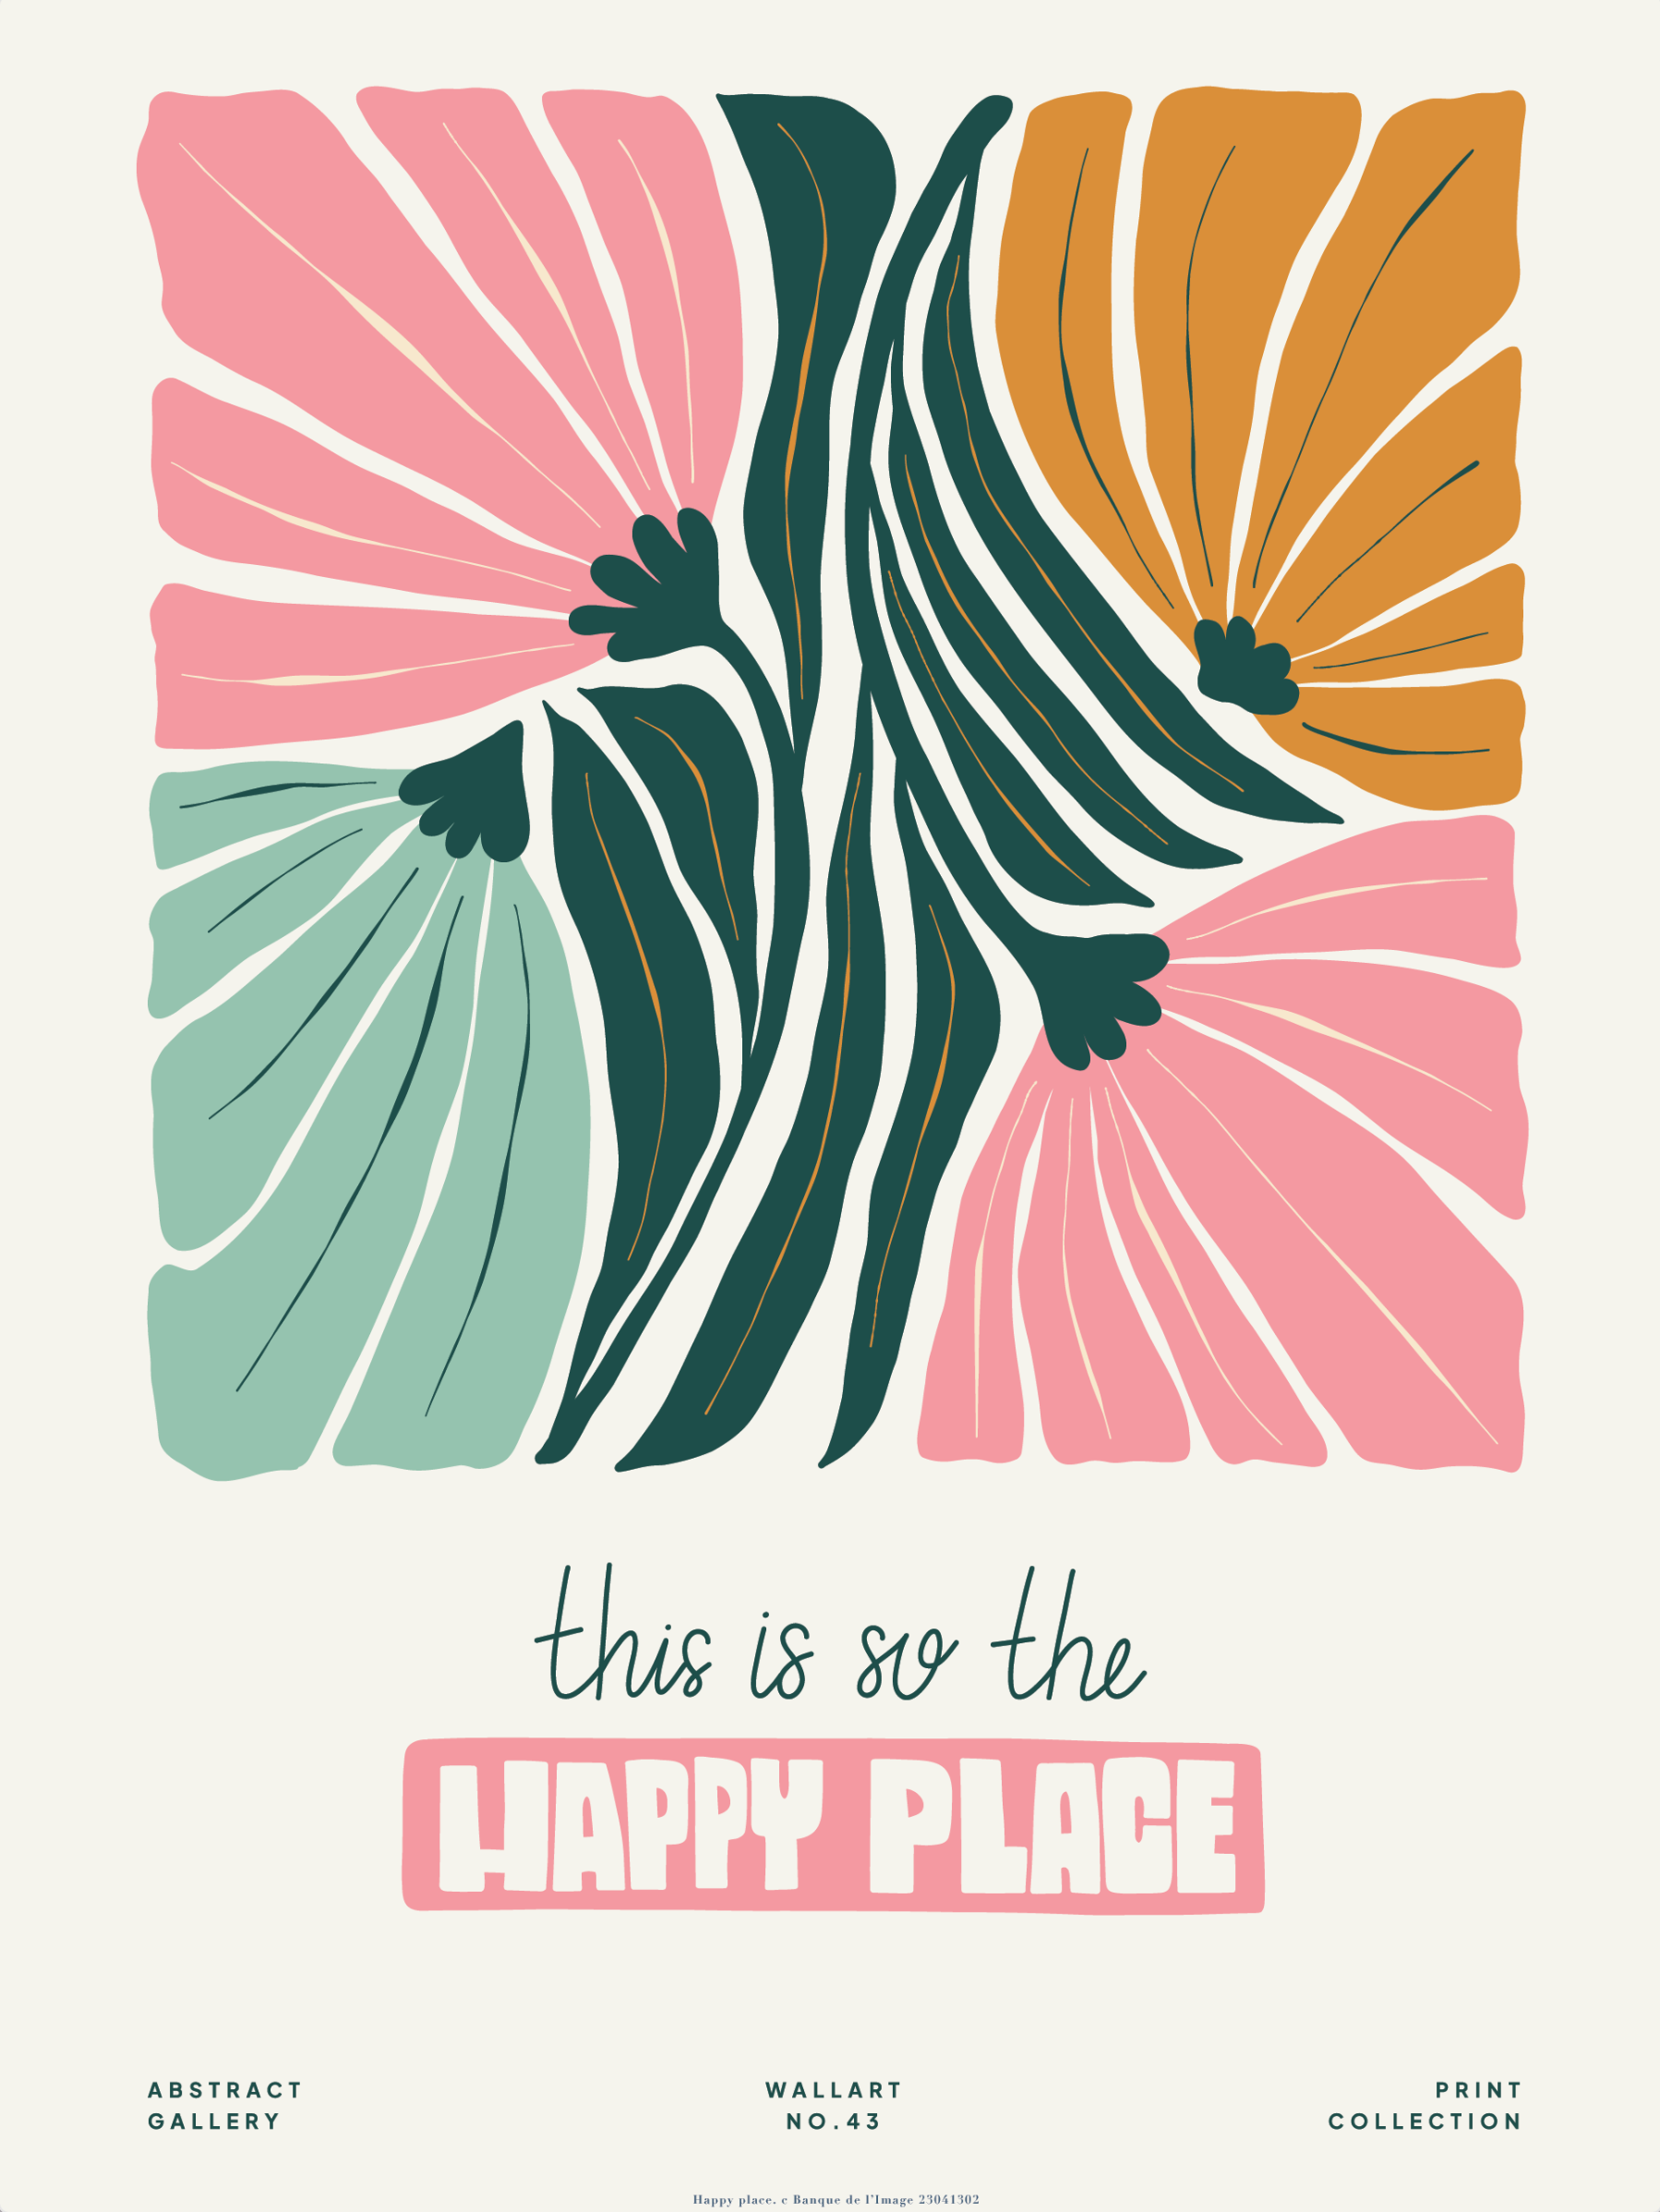 Abstract Gallery - Happy Place